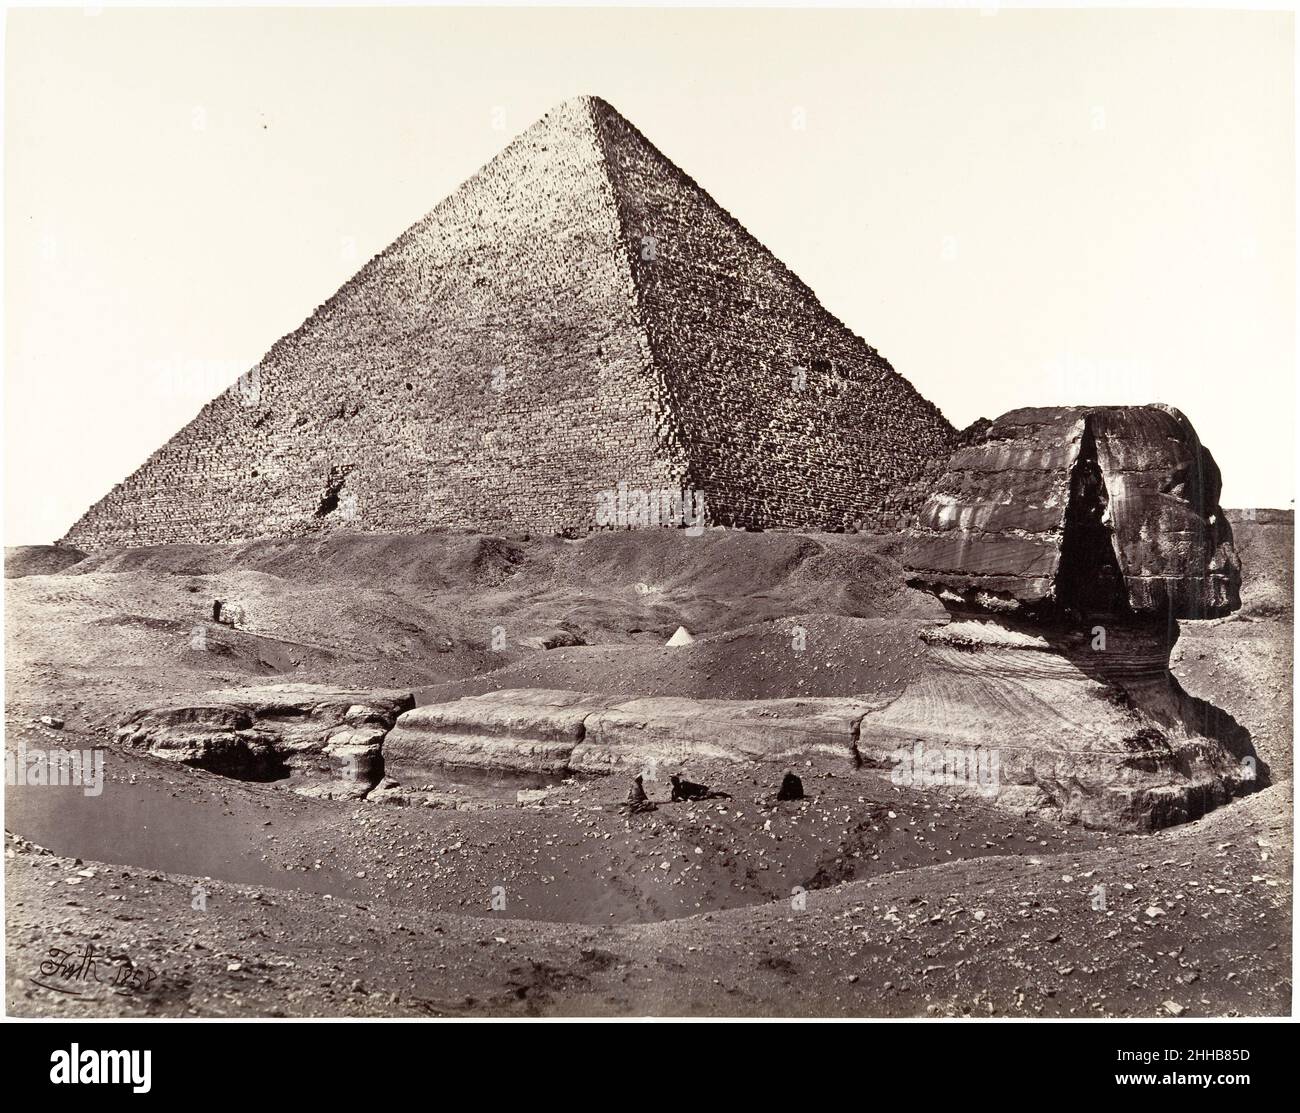 The Great Pyramid and The Great Sphinx 1858 Francis Frith British In 1856 Frith set out on the first of three trips to the Middle East, launching a highly successful career as a photographer and publisher of foreign topographic views. It is miraculous that he succeeded in making monumental and theatrical views such as this one, for the relatively new glass negatives required him to transport his enormous camera, sheets of glass, and bottles of chemicals through the desert and to coat, expose, and develop his plates before the collodion emulsion dried. 'With the thermometer at 110° in my tent,' Stock Photo